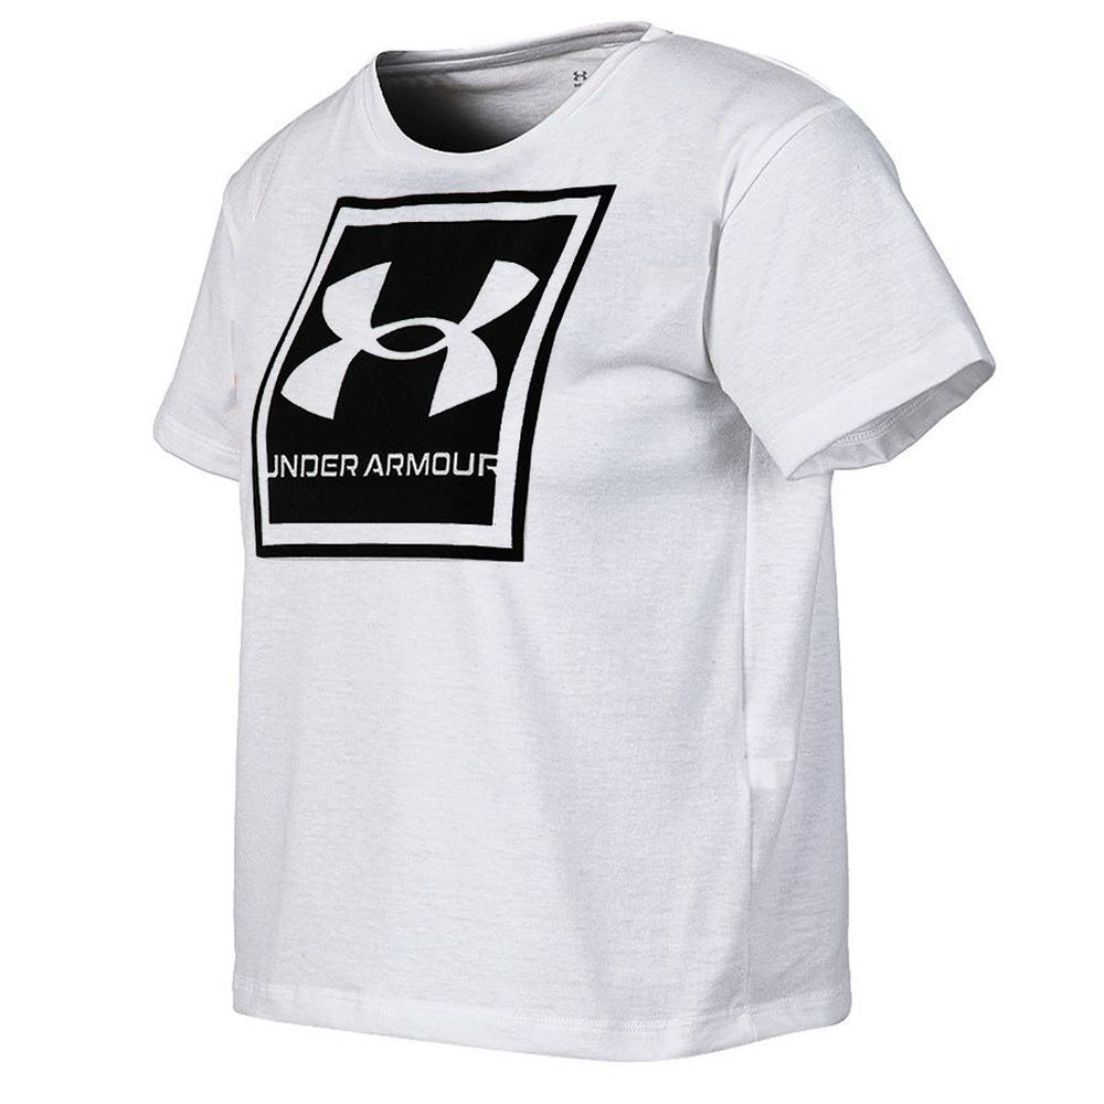 Remera Under Armour Live Glow Gp De Mujer - Sporting